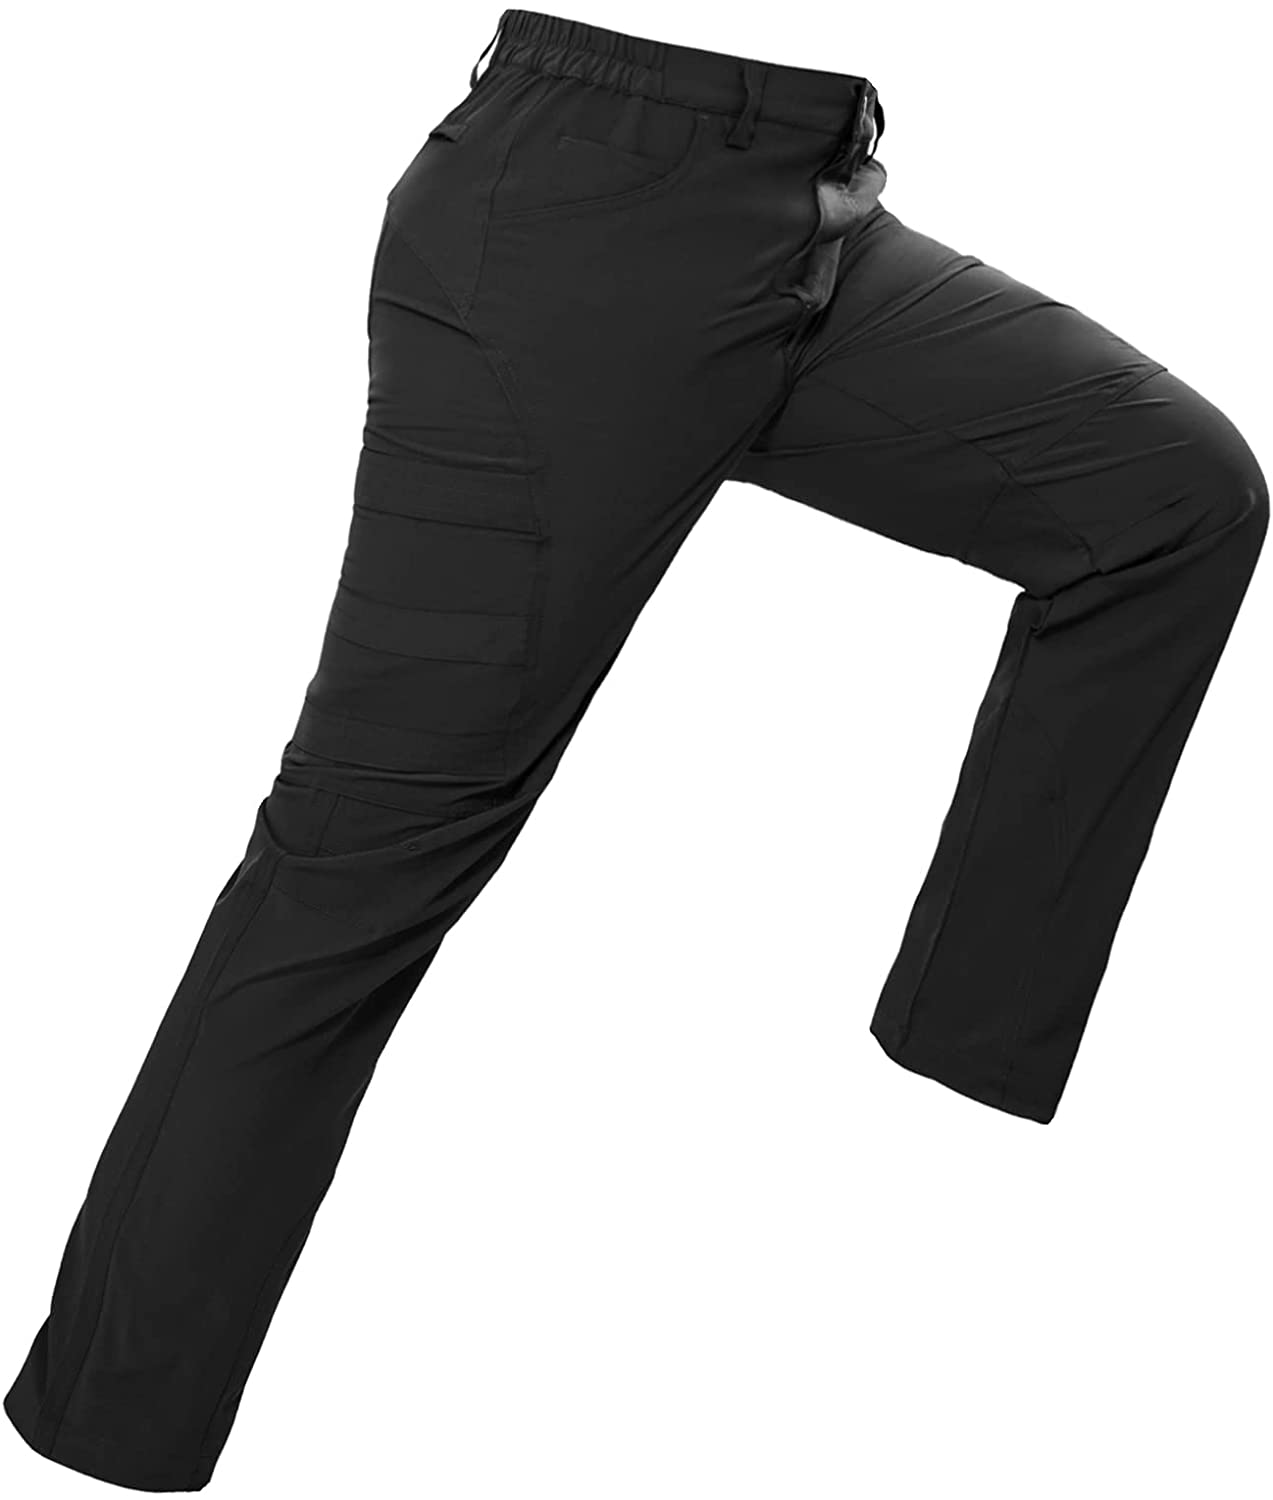 Hiauspor-Men's-Hiking-Pants-Outdoor，Breathable Stretch Cargo Hiking Pa